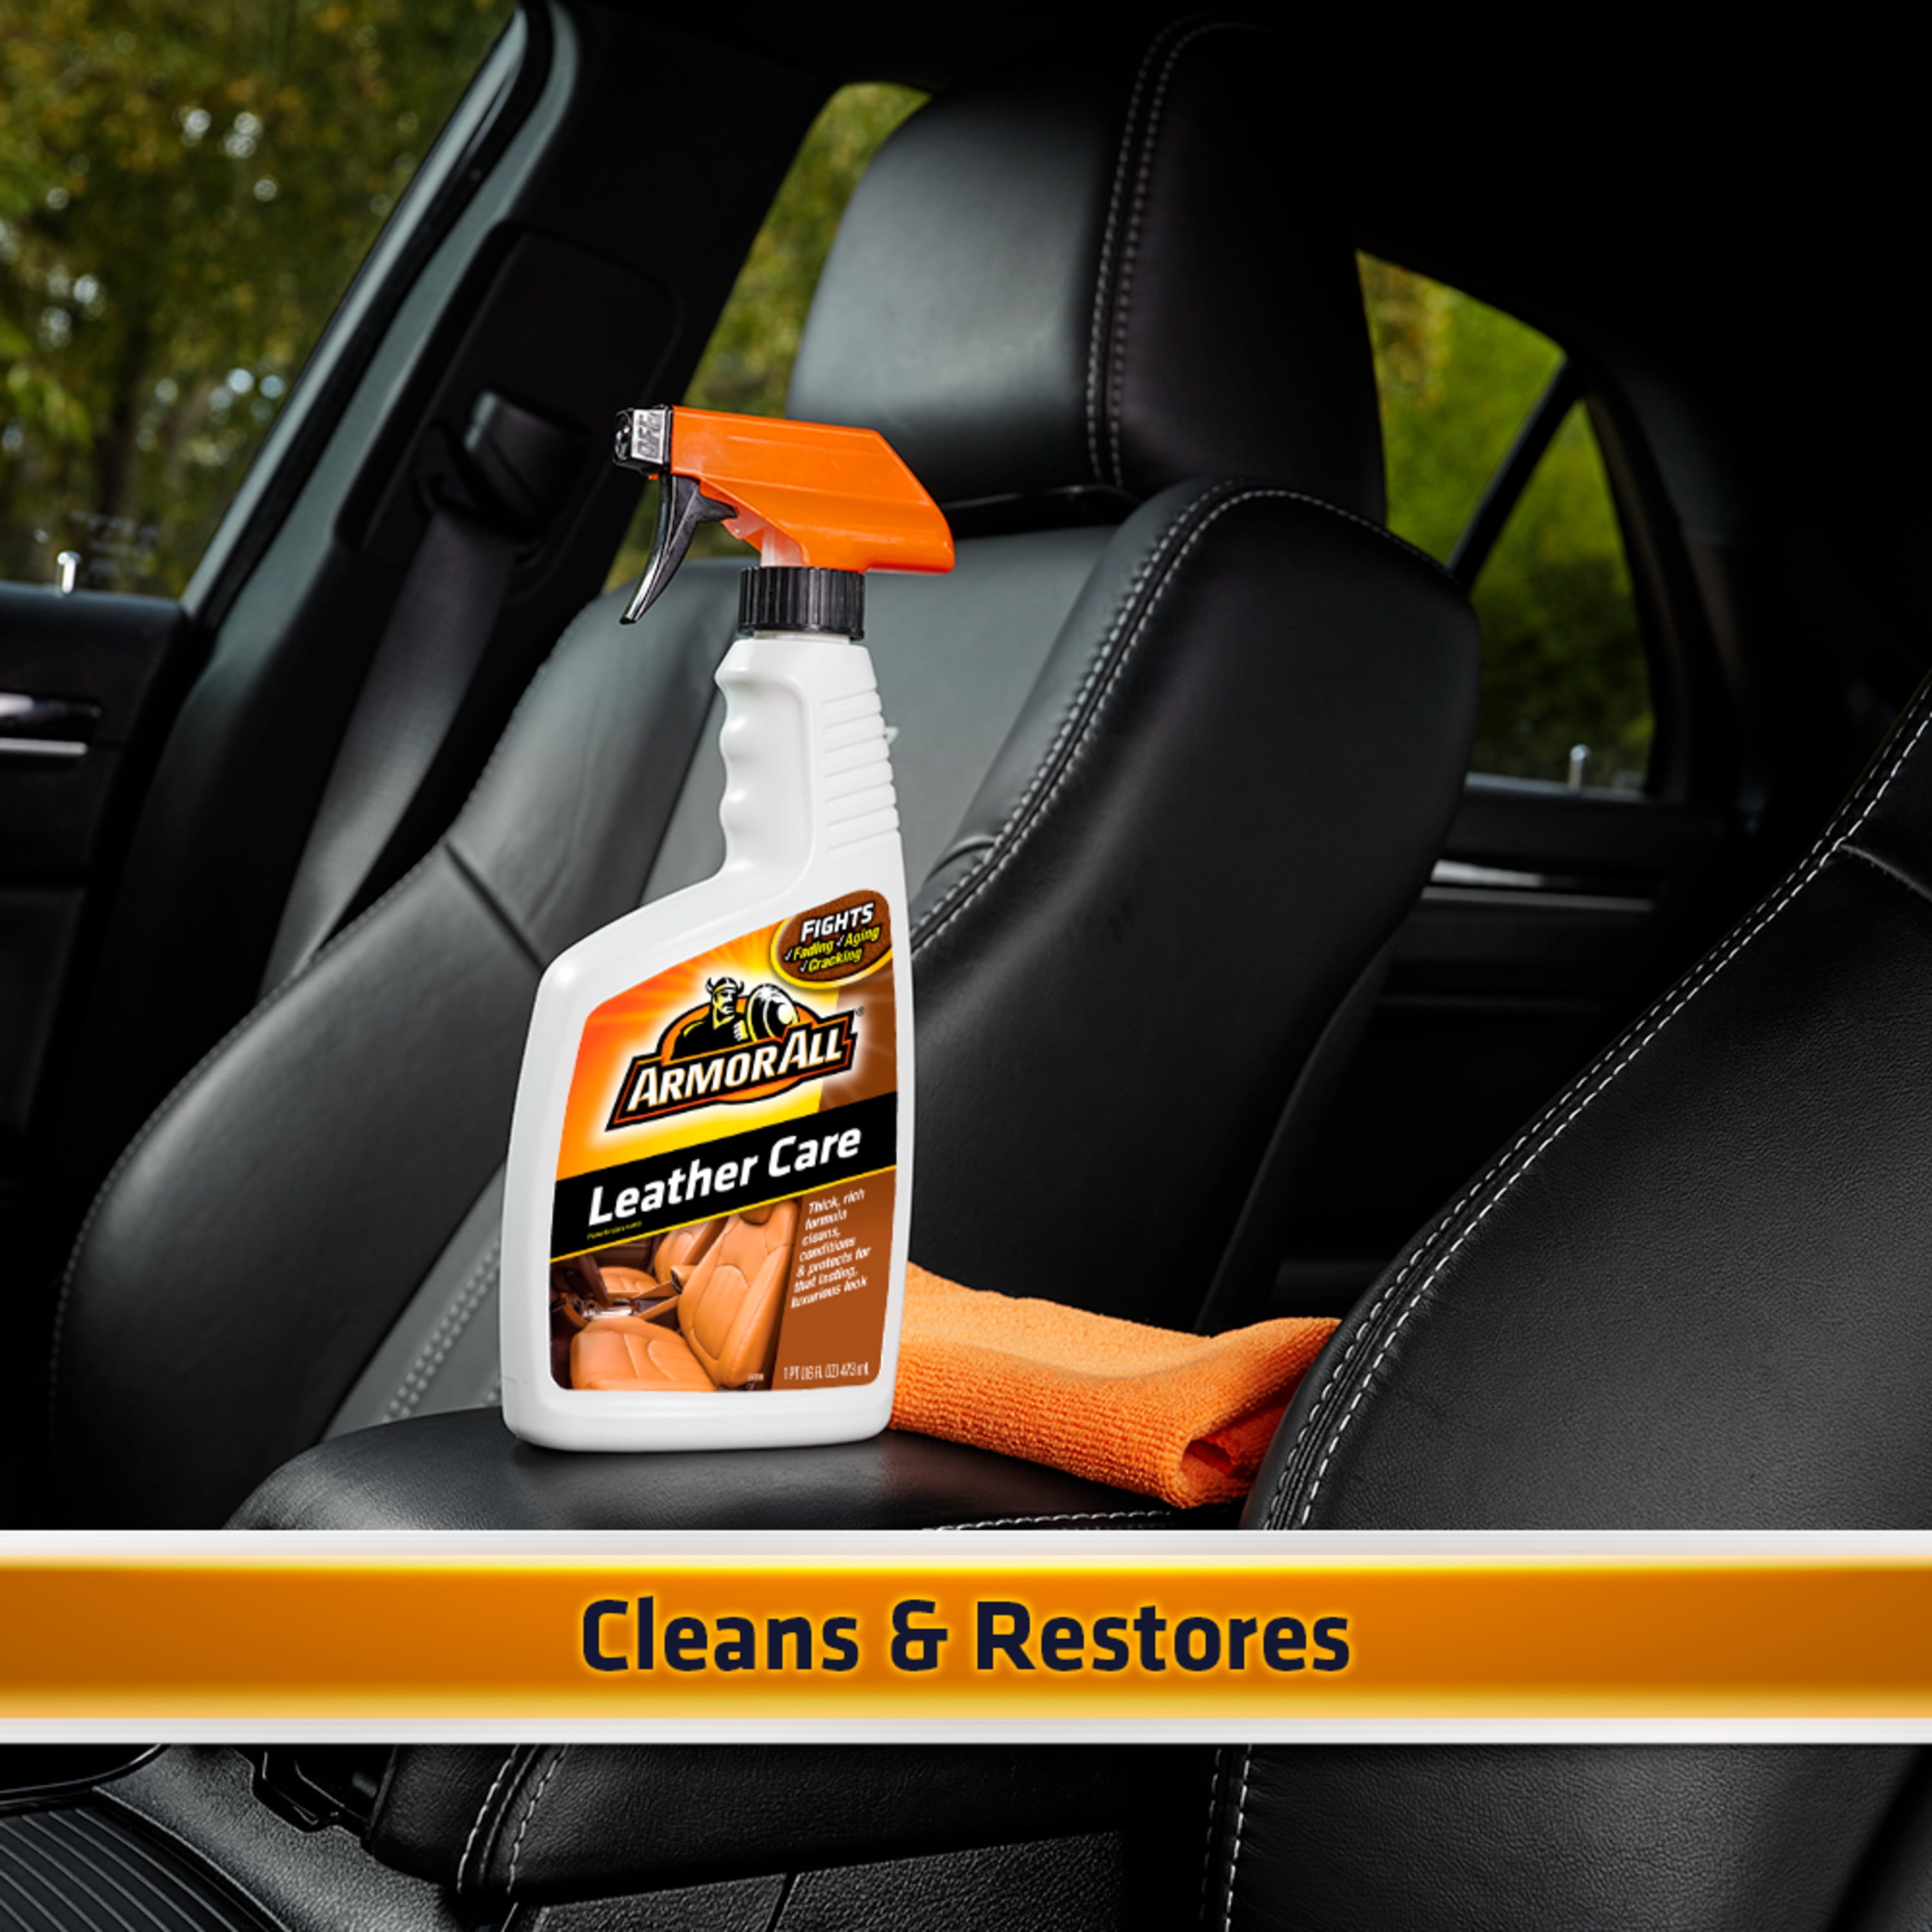 Armor All Leather Care Cleaner, Conditioner And Protectant - 16 FL